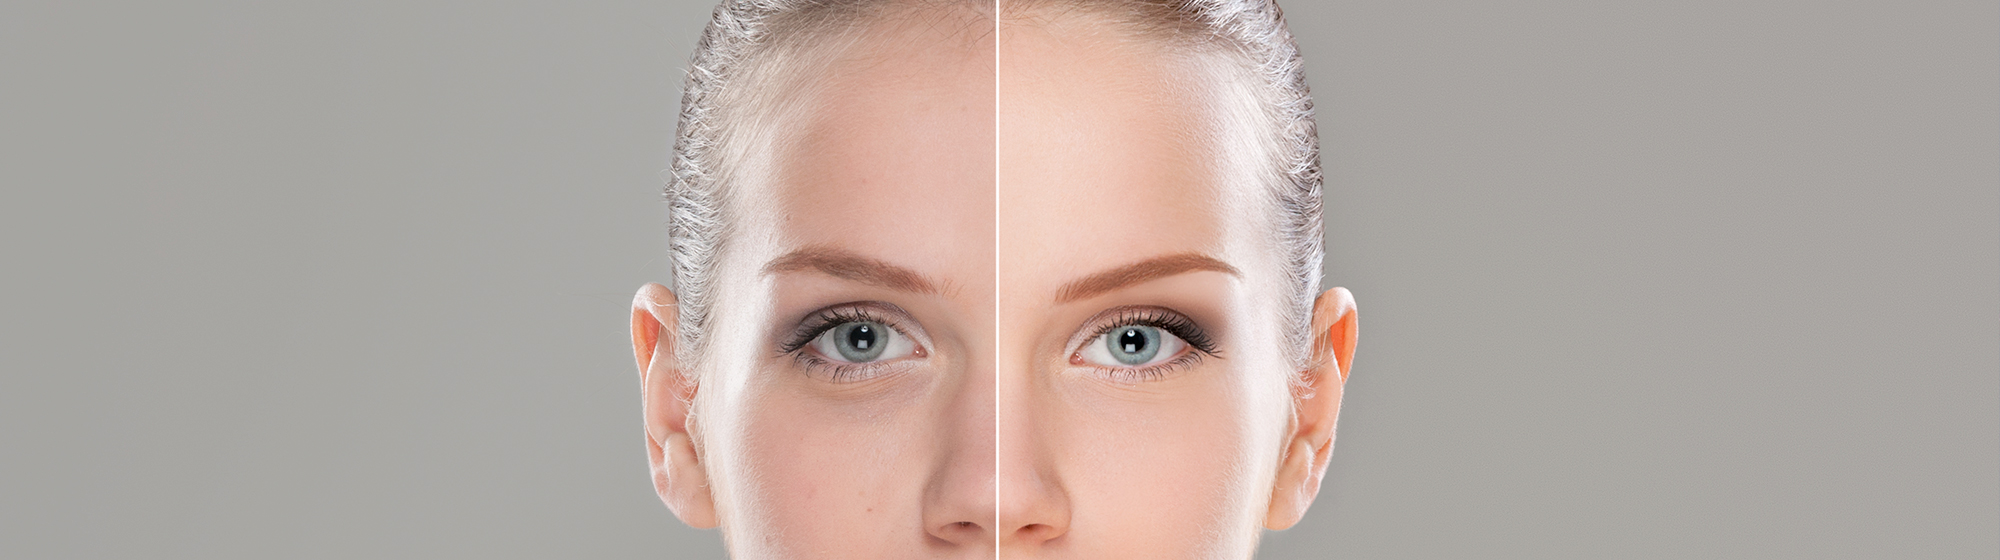 Oculofacial Plastic Surgery Before and After Pictures, FL